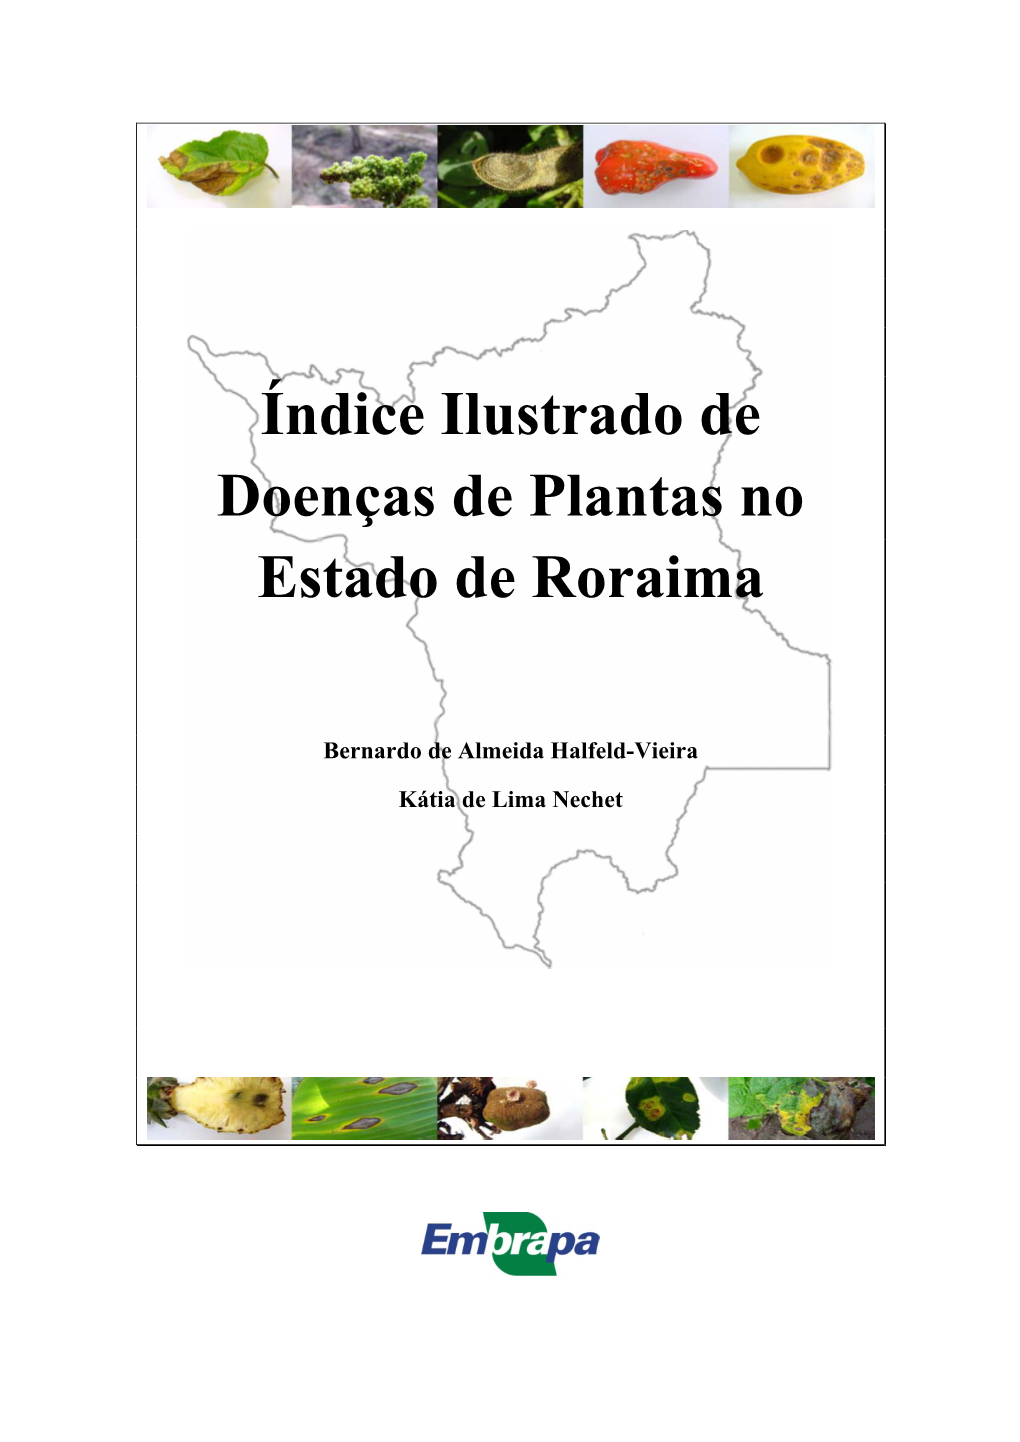 Illustrated Index of Plant Diseases in the State of Roraima, Brazil